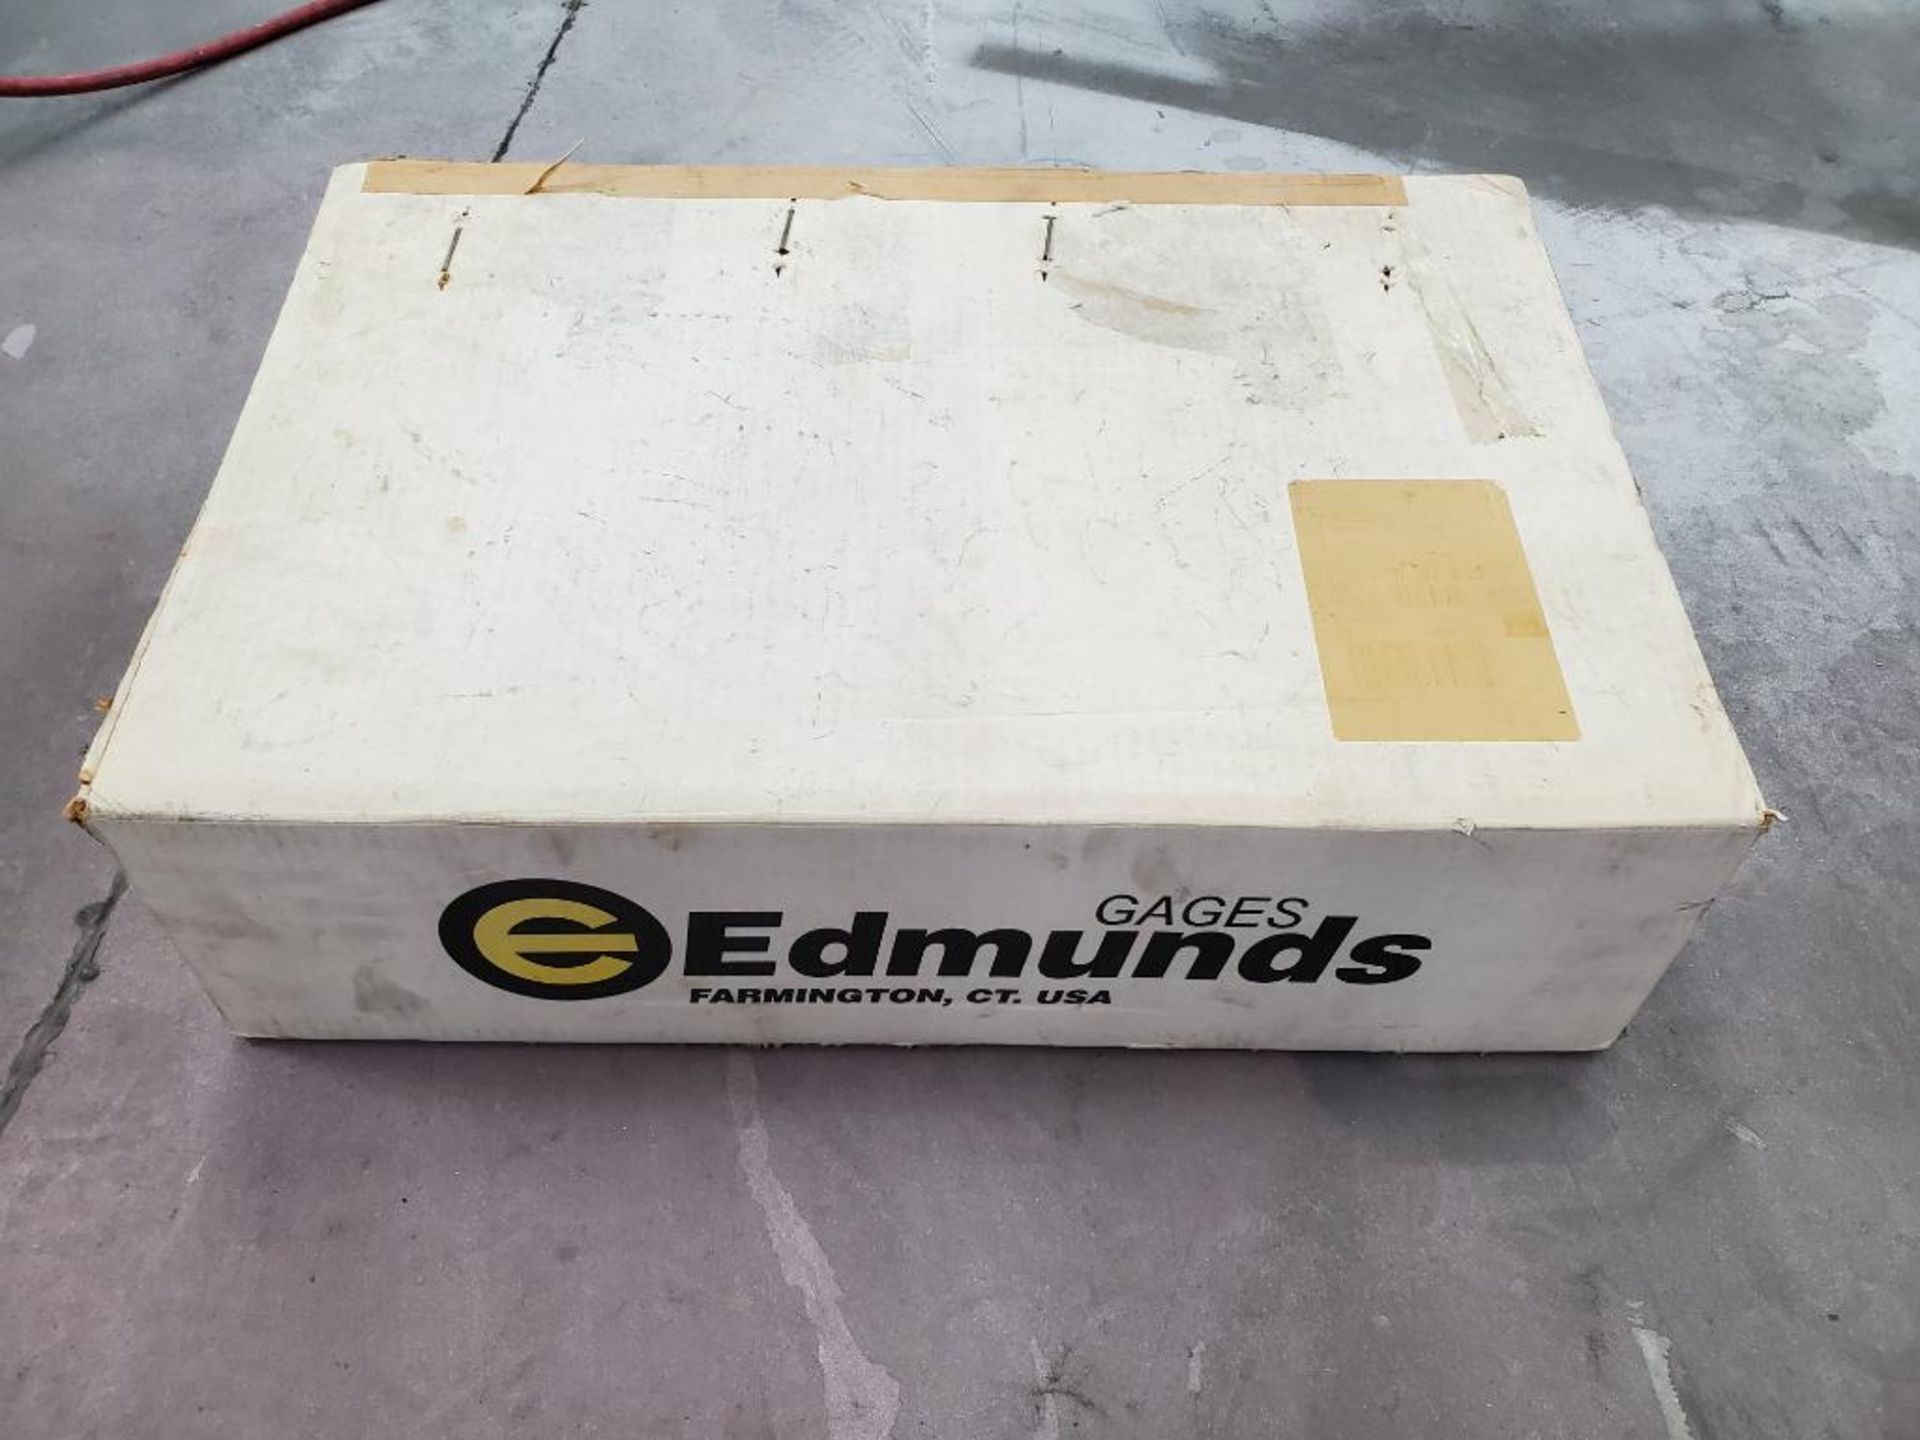 Edmunds Gage Accu-Setter E-9020 Digital Height Gage - Image 7 of 7